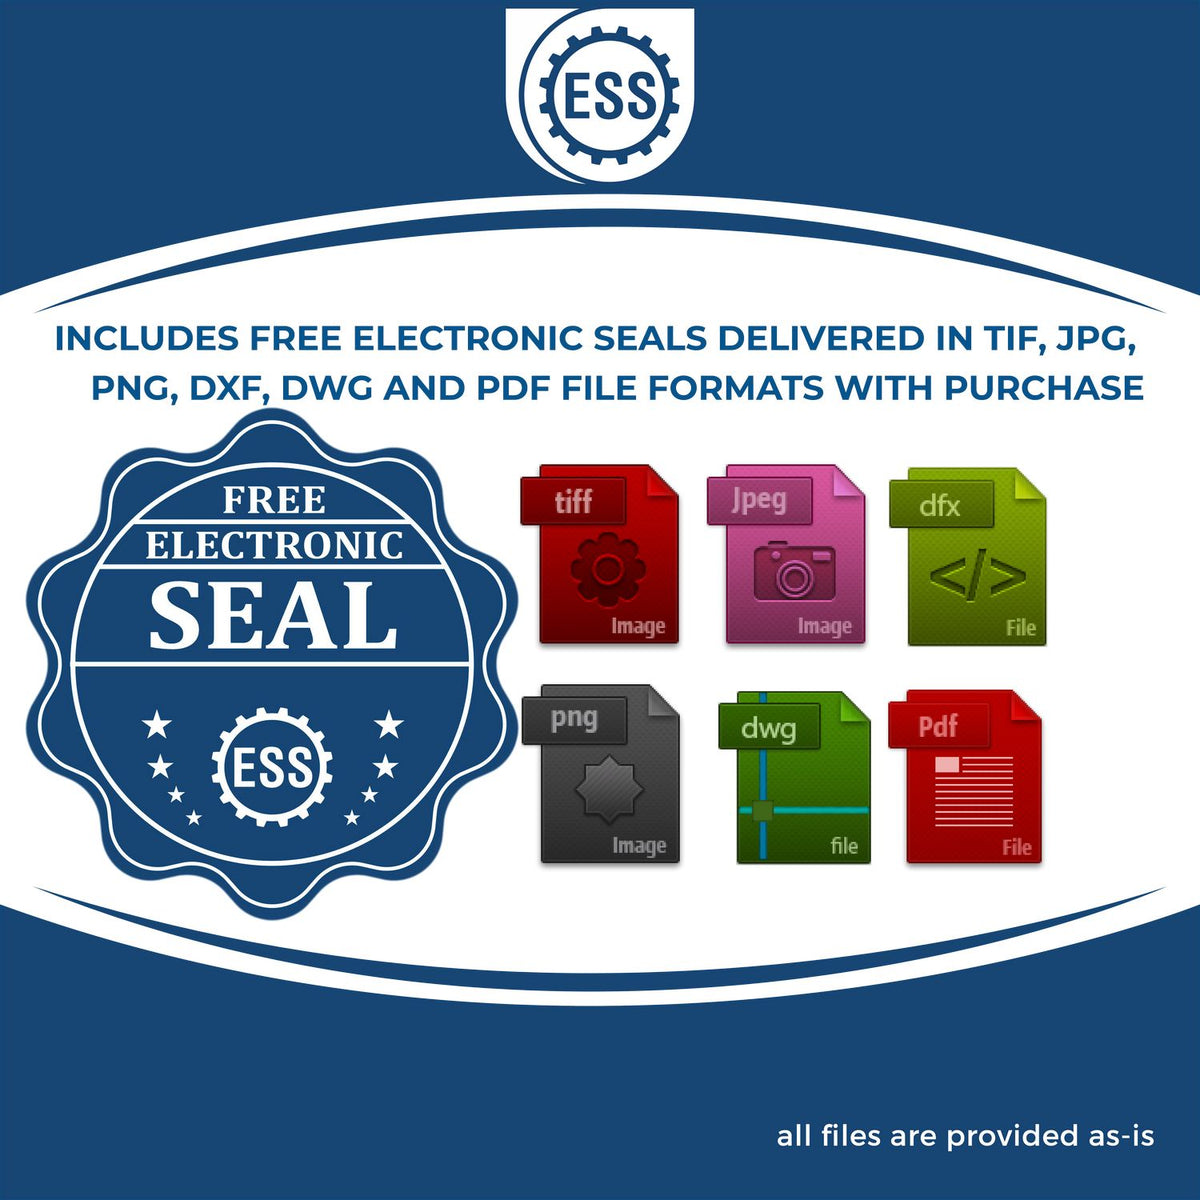 An infographic for the free electronic seal for the Long Reach Tennessee PE Seal illustrating the different file type icons such as DXF, DWG, TIF, JPG and PNG.